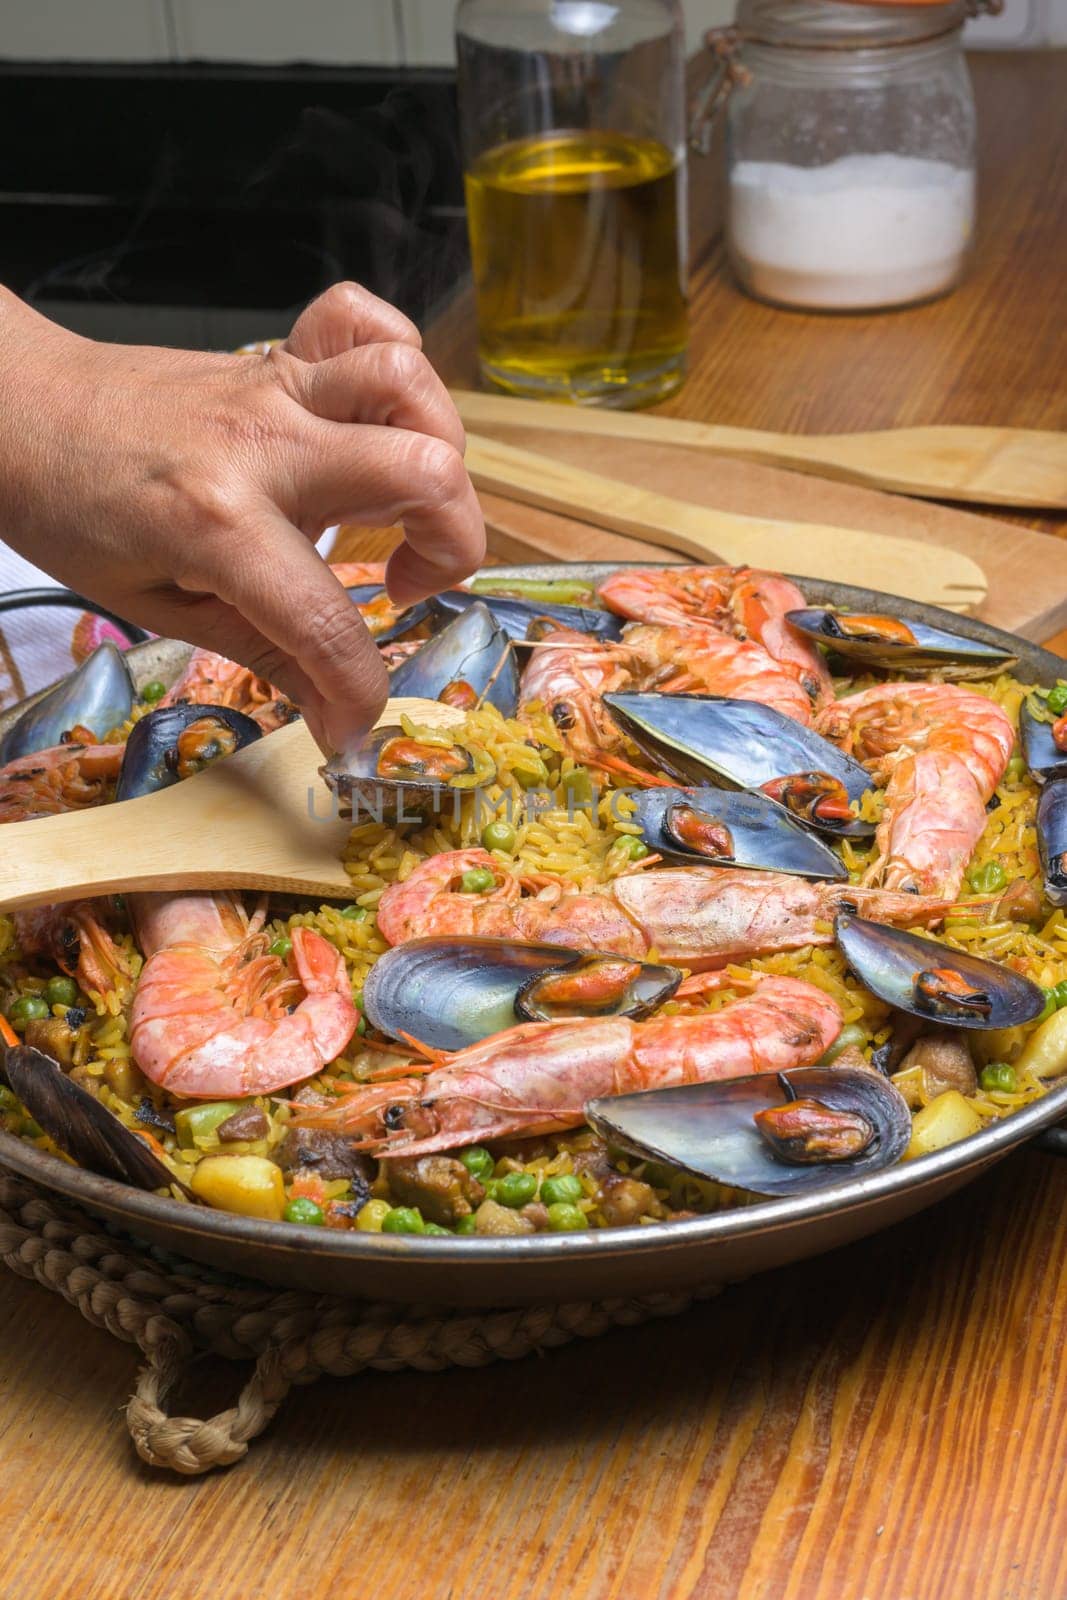 Hand gently stirring a seafood paella with shrimp and mussels using a wooden spatula, typical Spanish cuisine, Majorca, Balearic Islands, Spain,